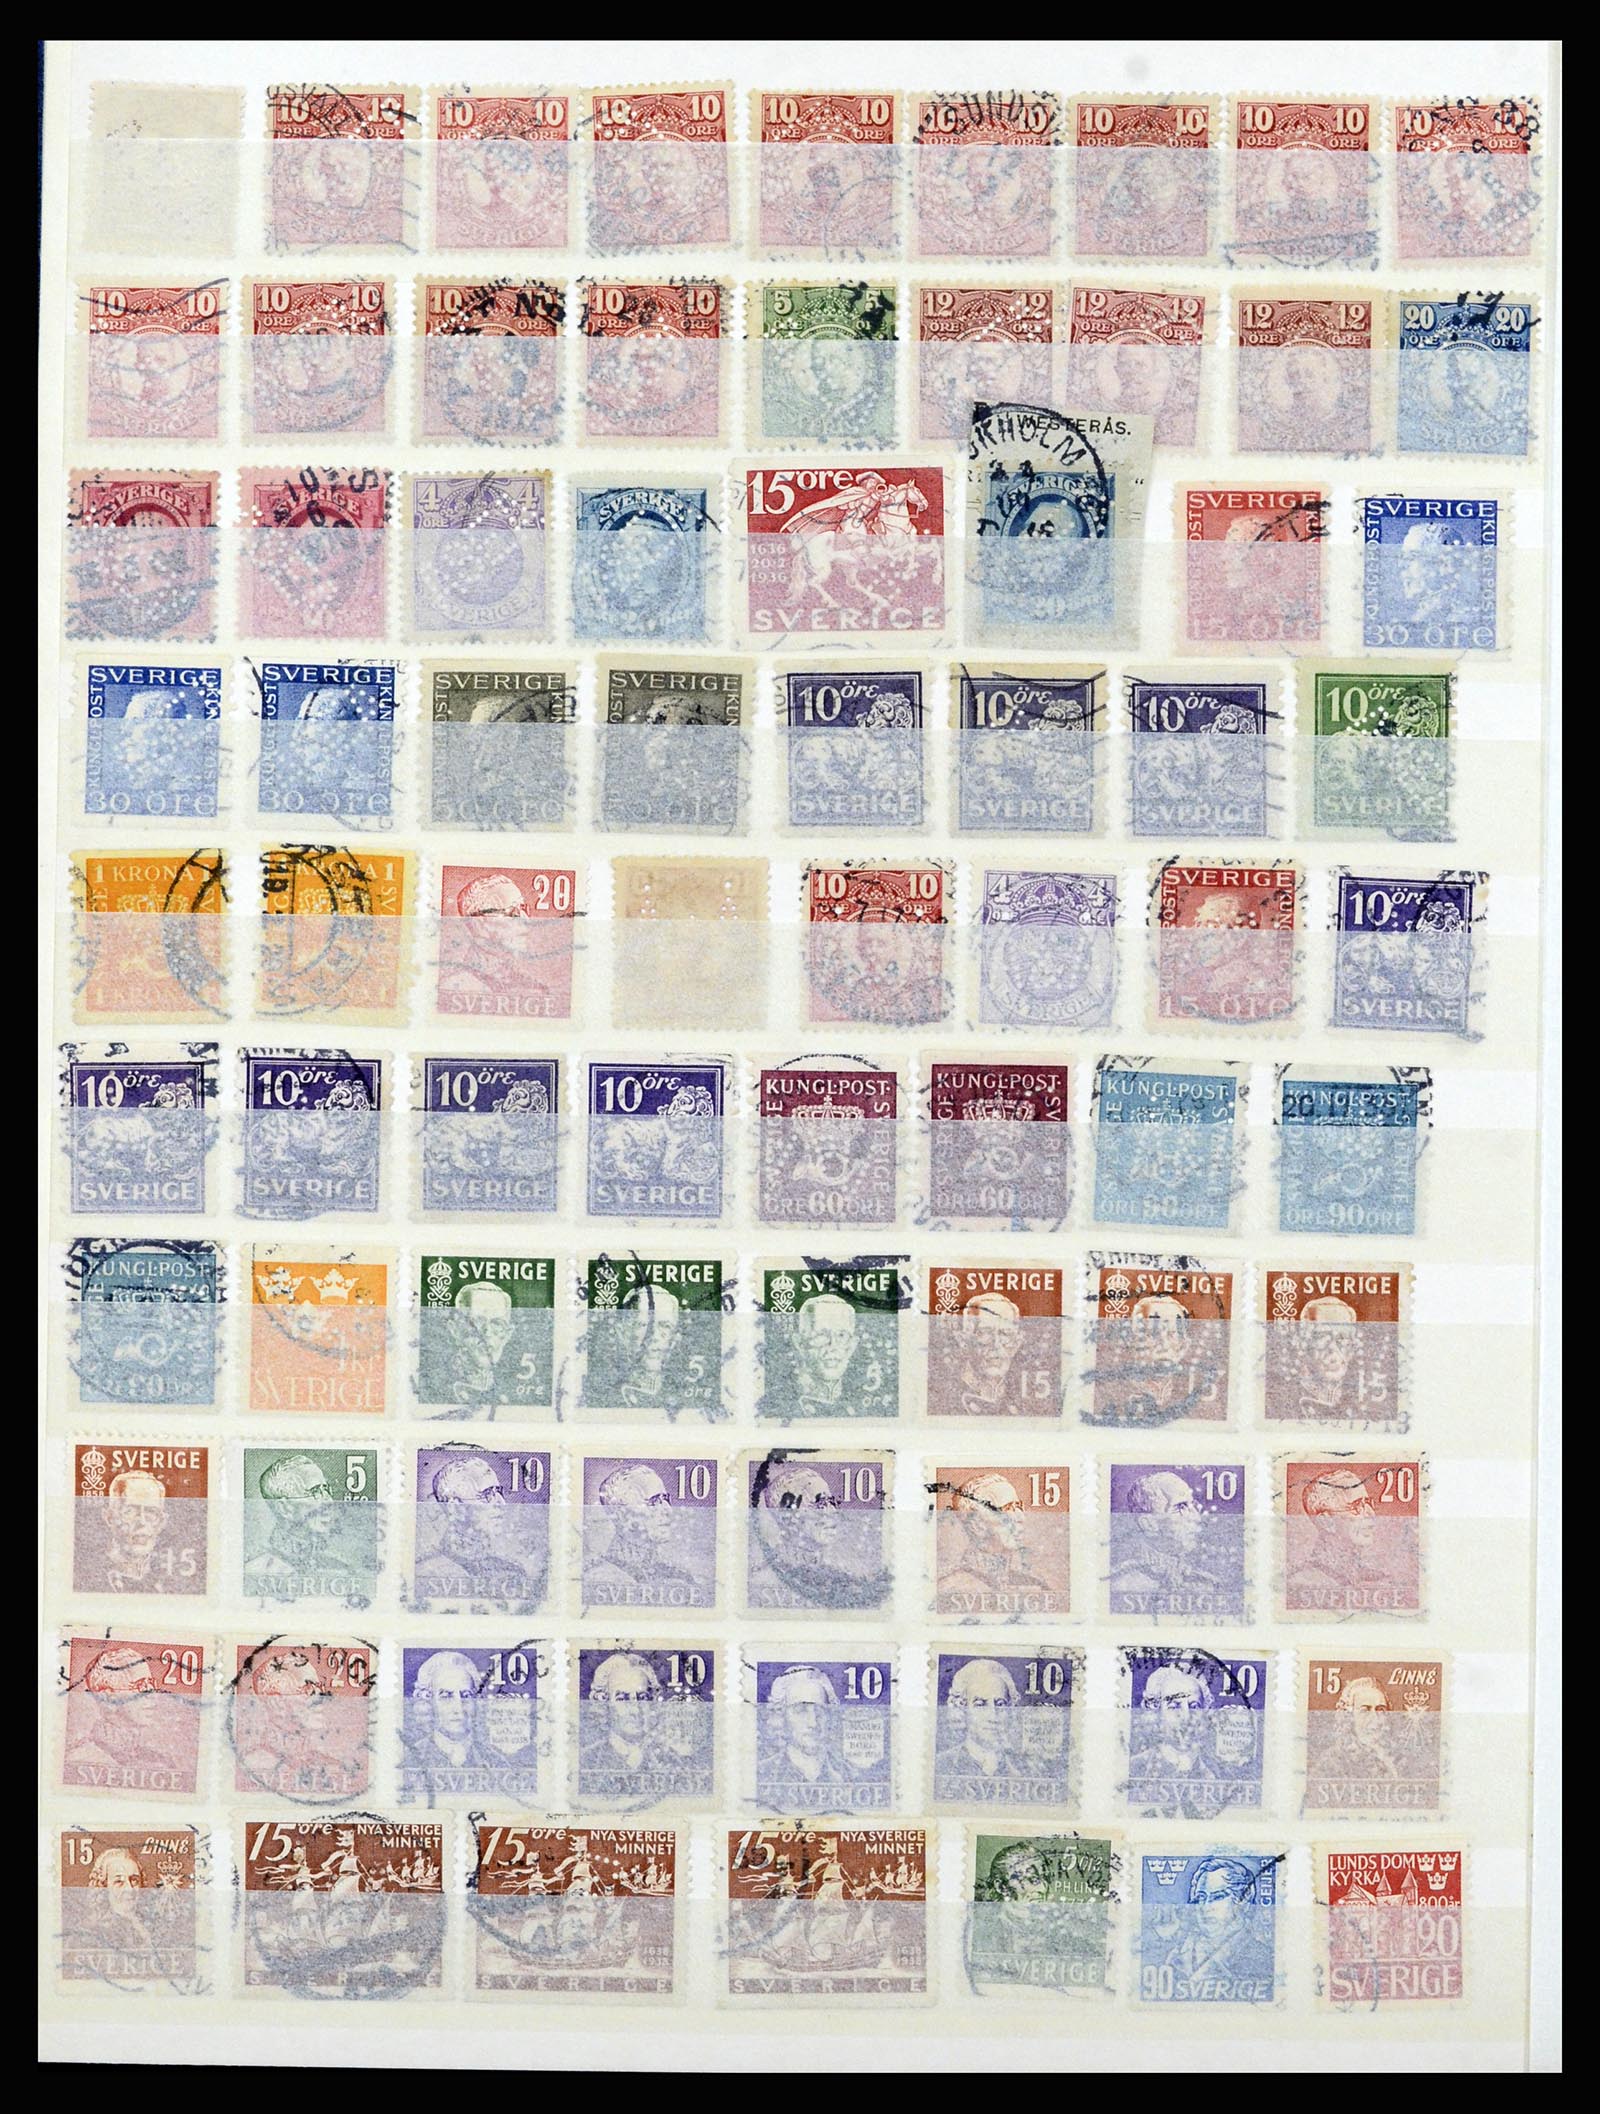 37057 051 - Stamp collection 37057 World perfins 1880-1950.